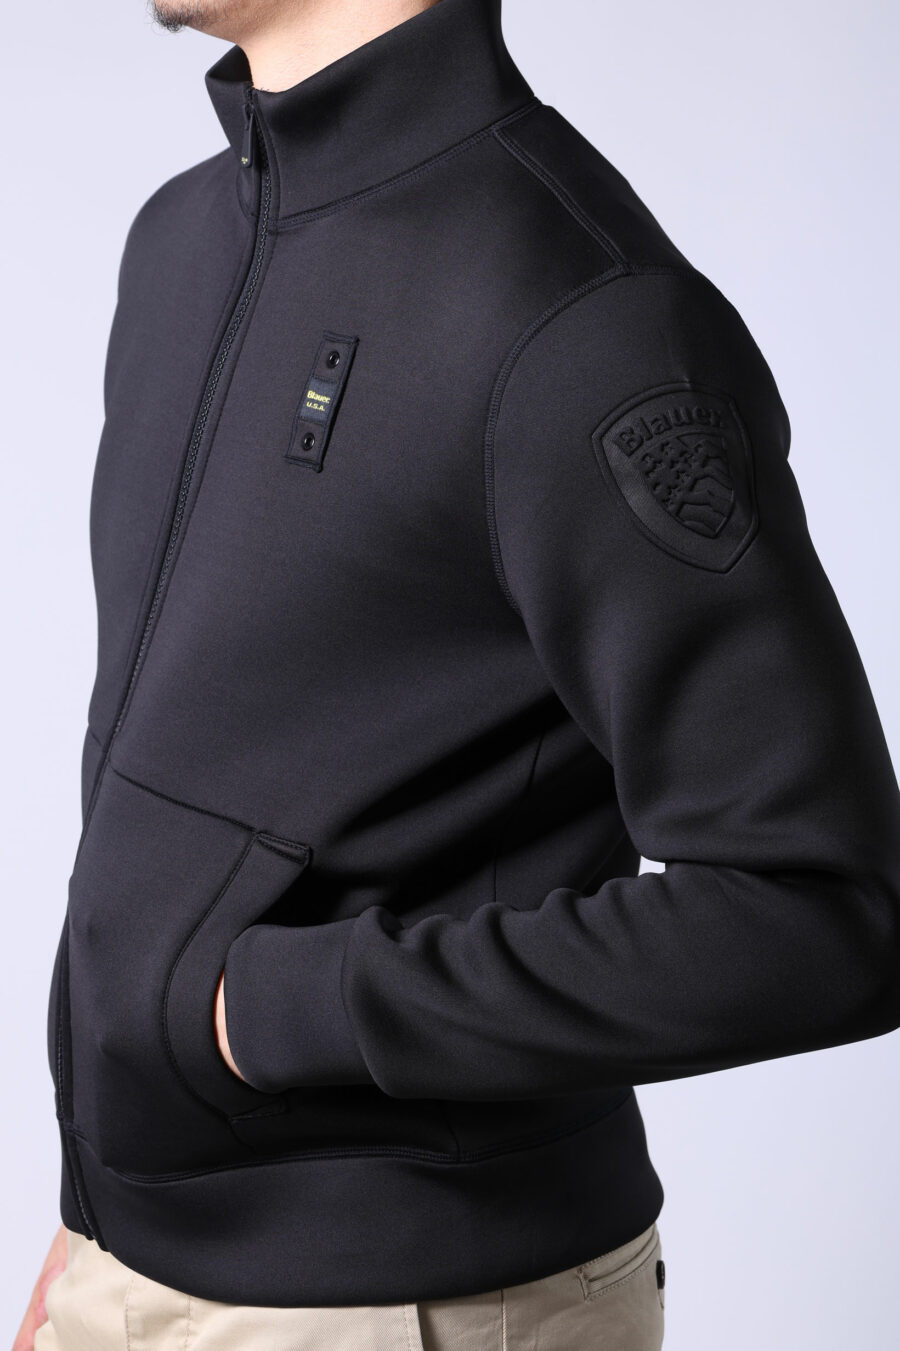 Black sweatshirt with zip and monochrome logo patch - Untitled Catalog 05633